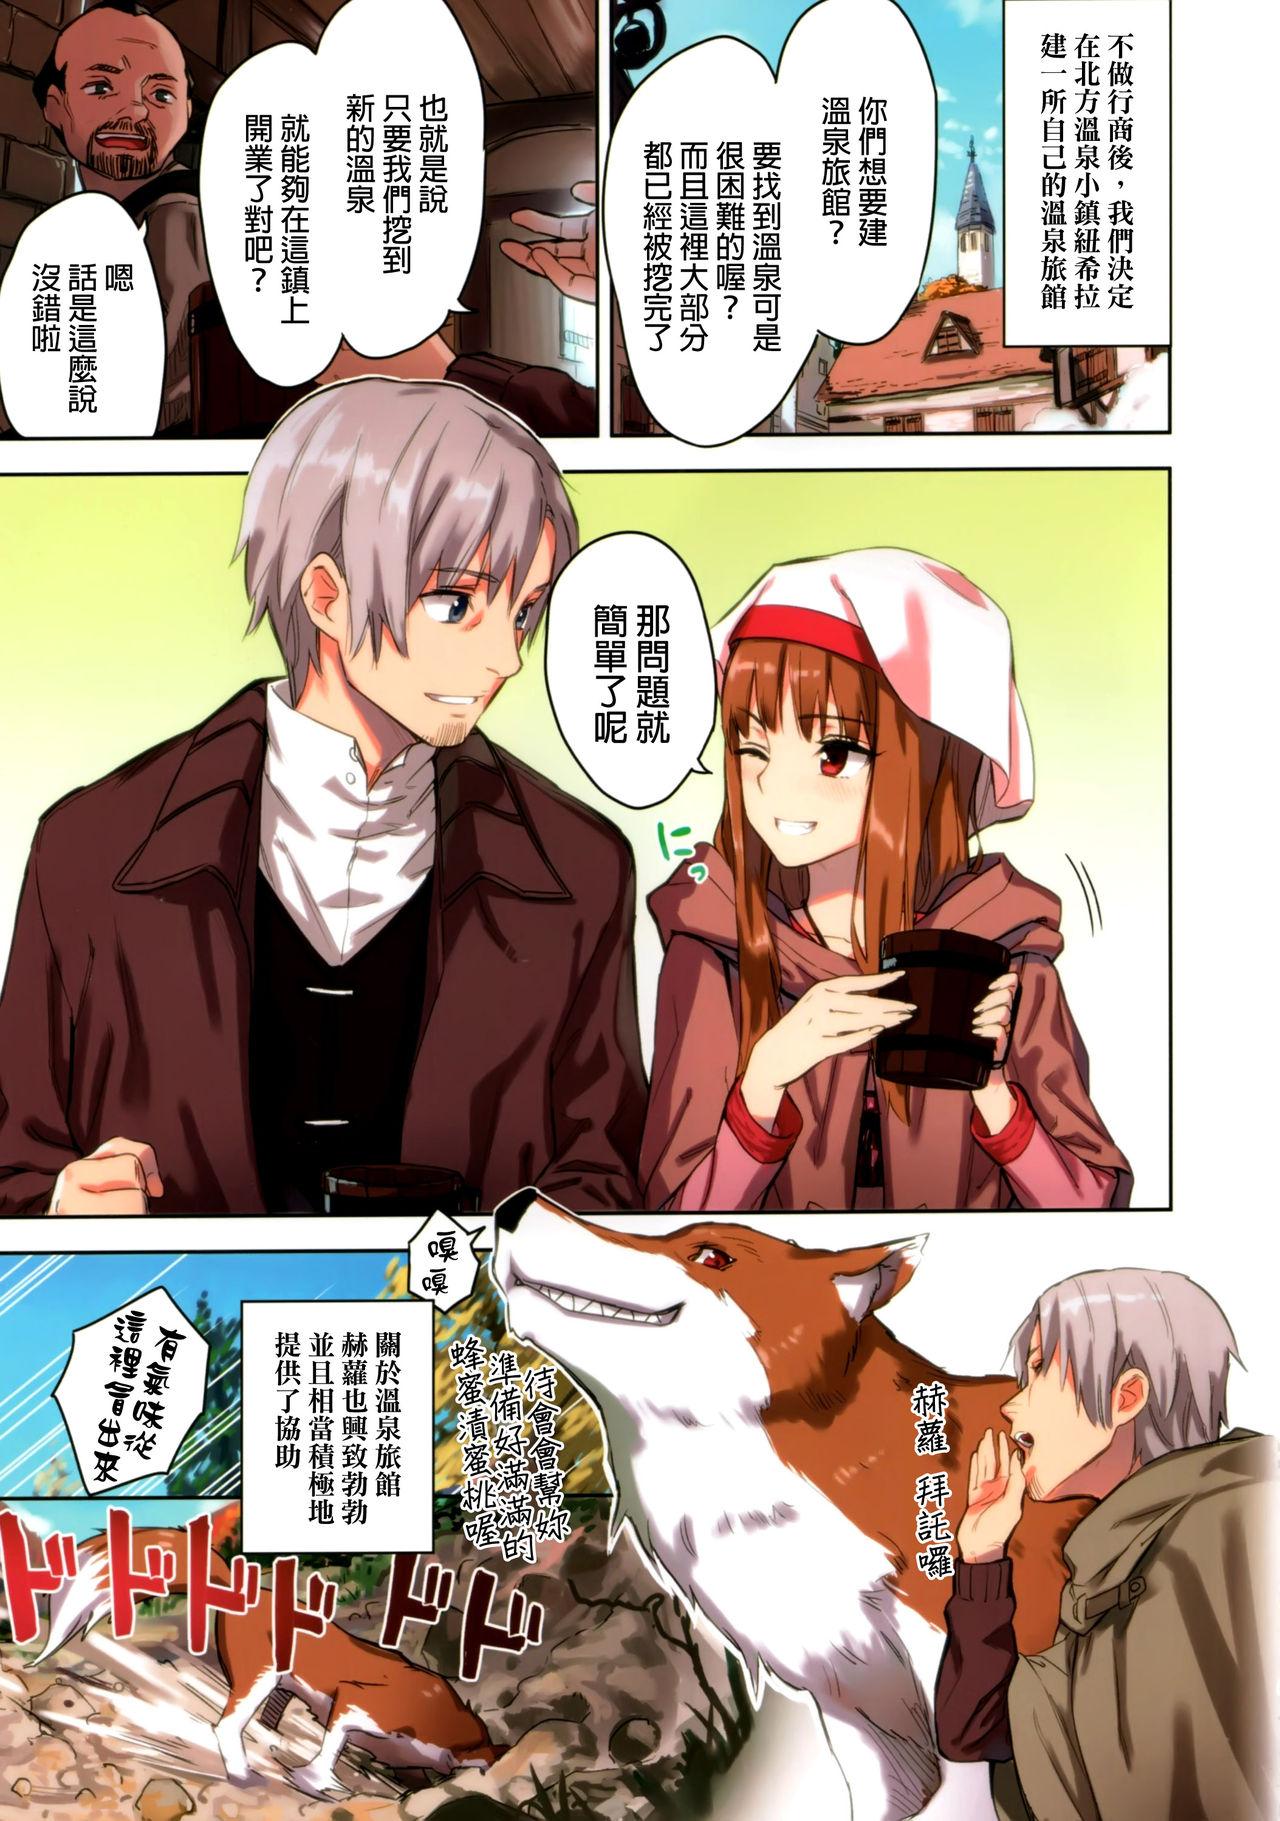 Busty Wacchi to Nyohhira Bon FULL COLOR - Spice and wolf Shavedpussy - Page 6